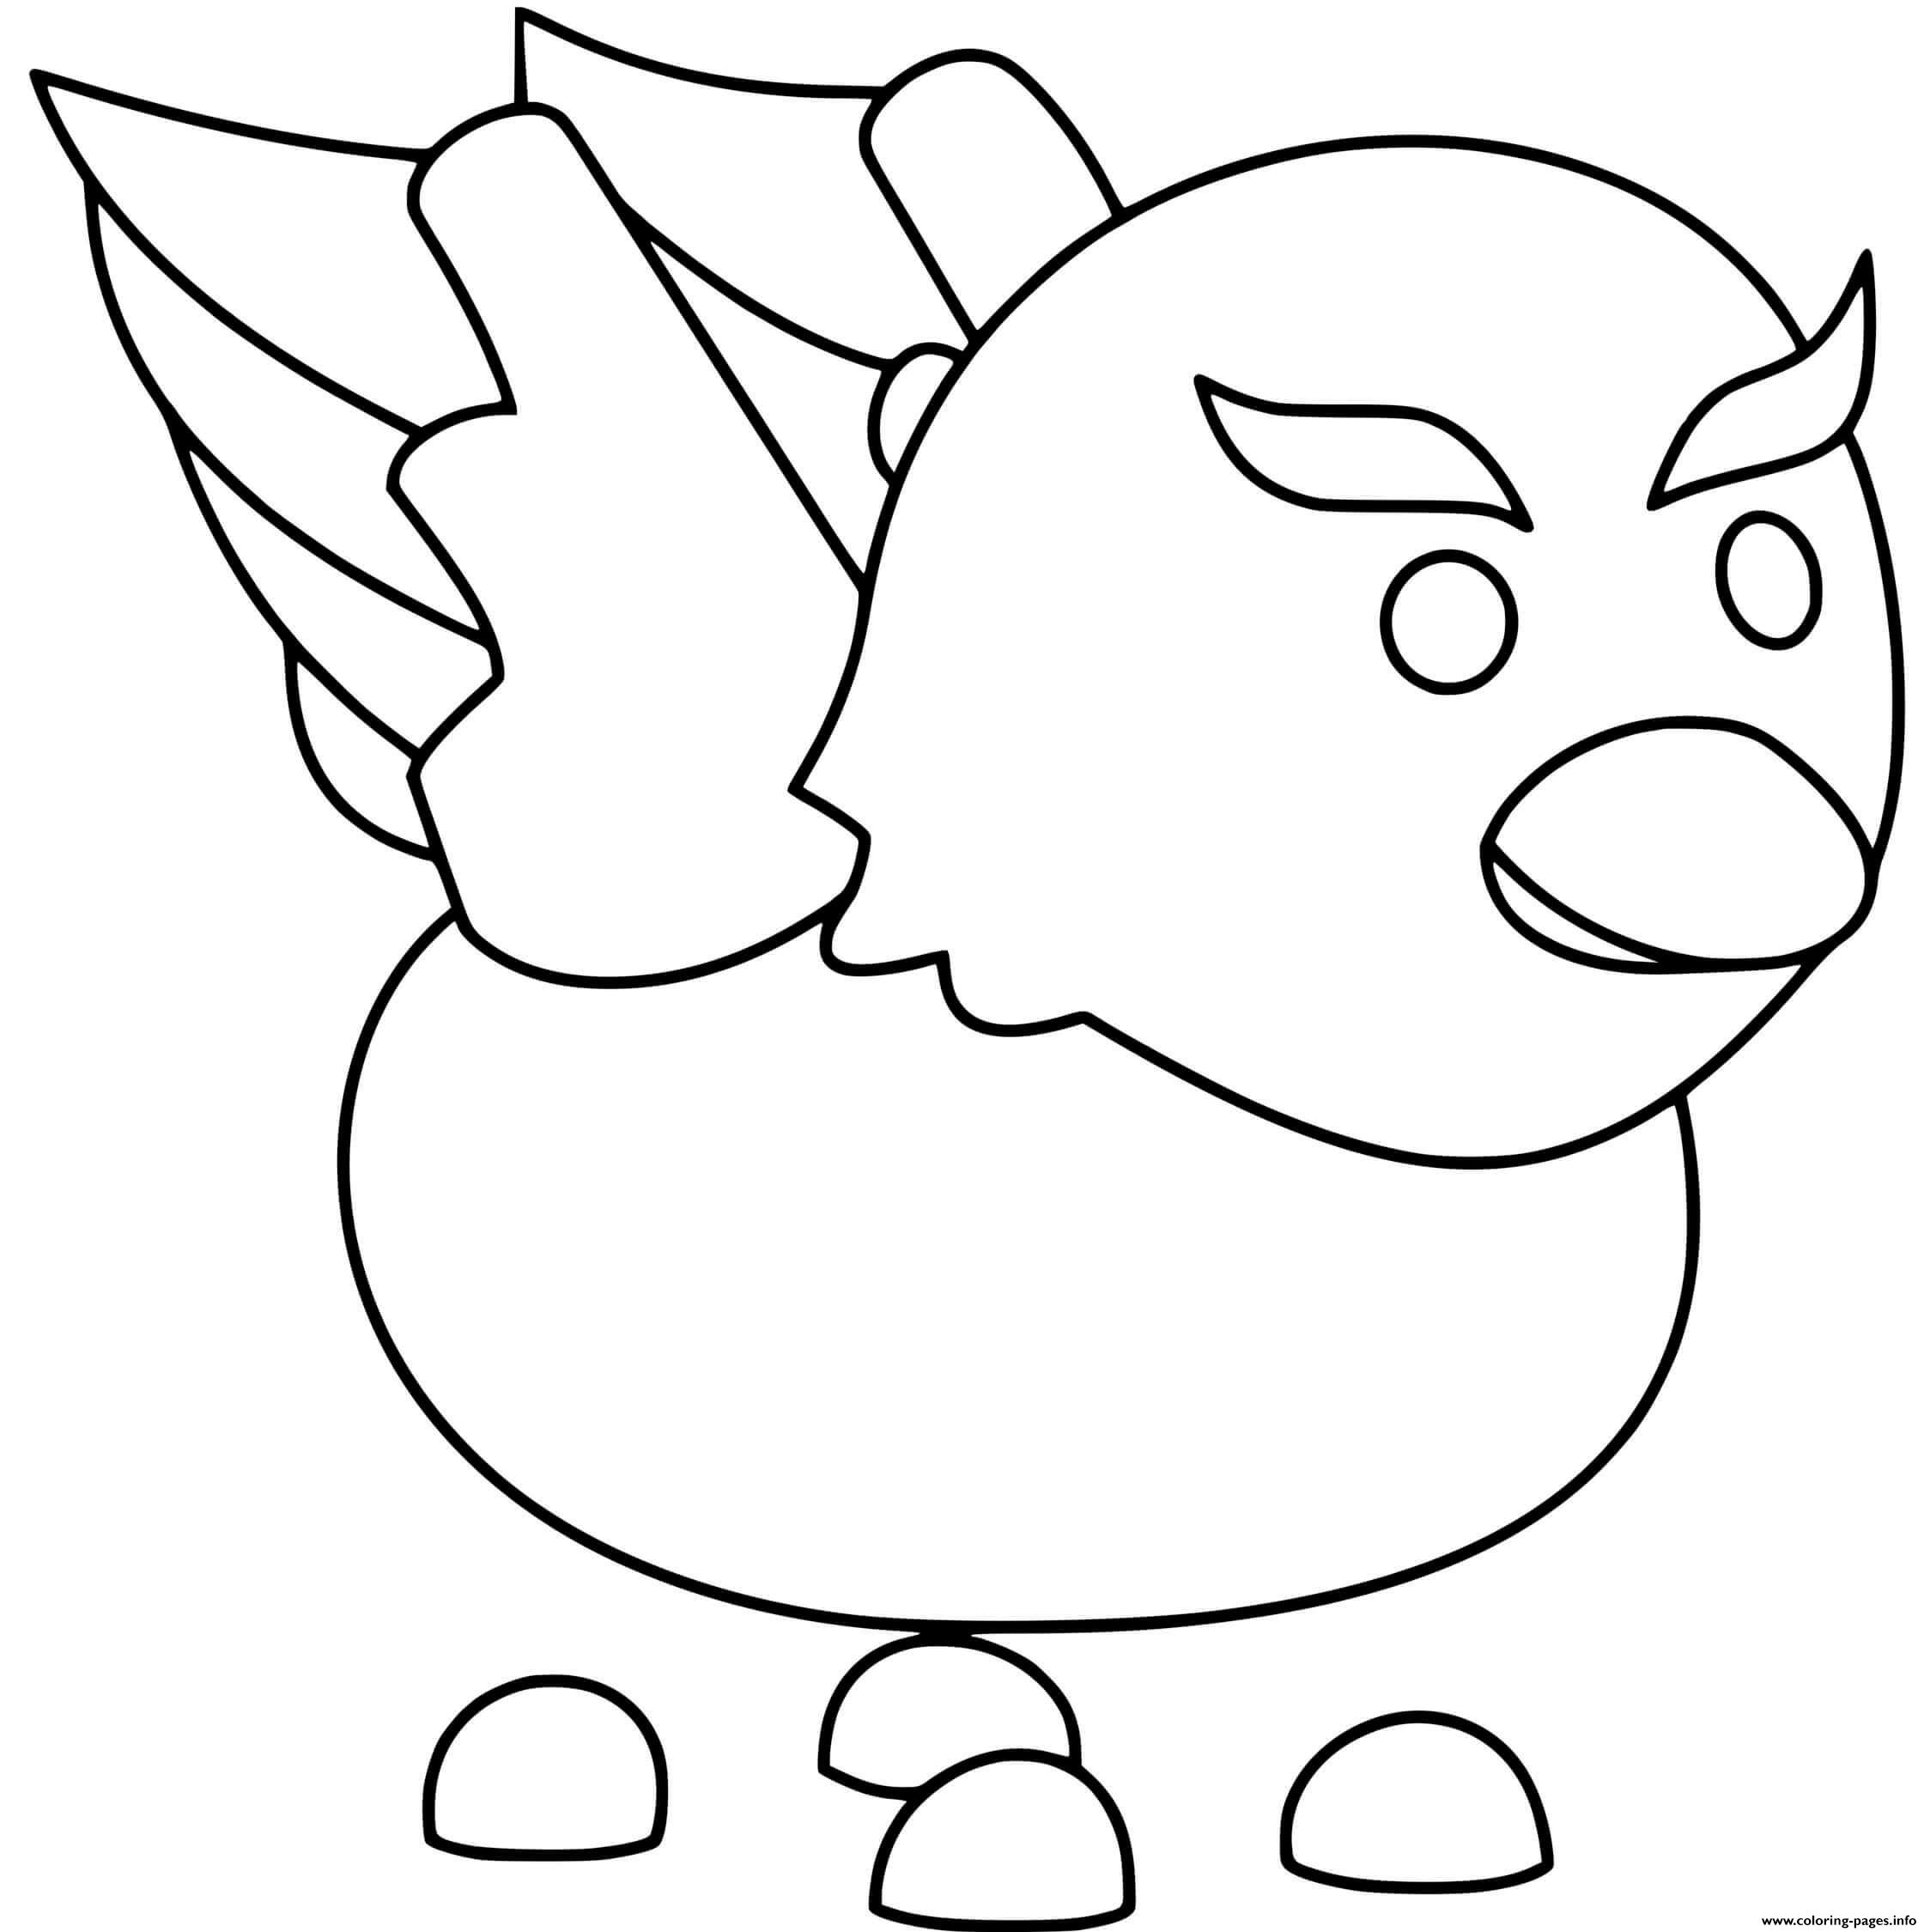 Roblox Adopt Me Griffin Coloring Pages Printable - roblox adopt me coloring pages printable